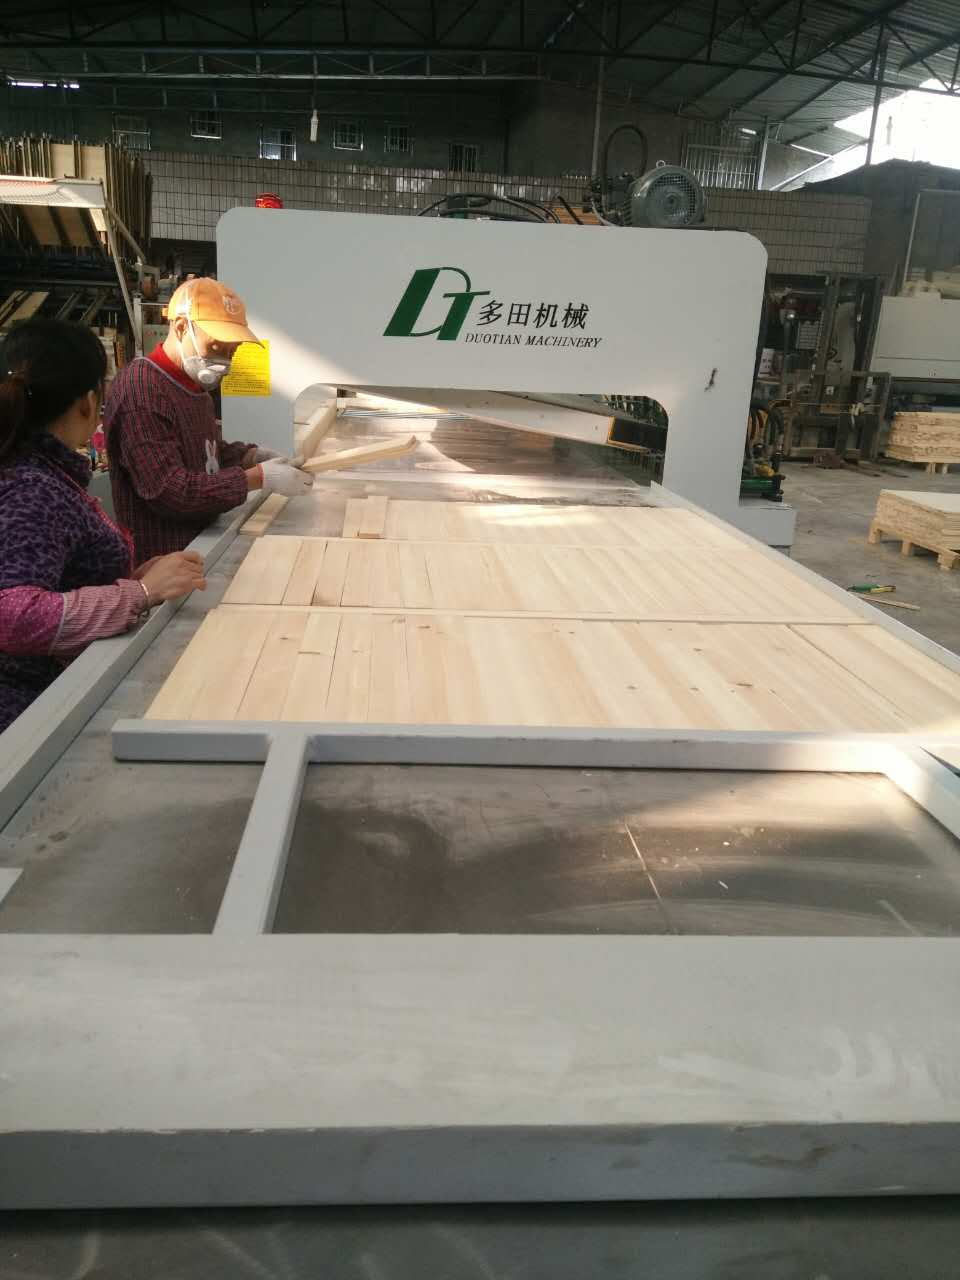  High Frequency Board Jointing Machine(with feeing and discharge table)